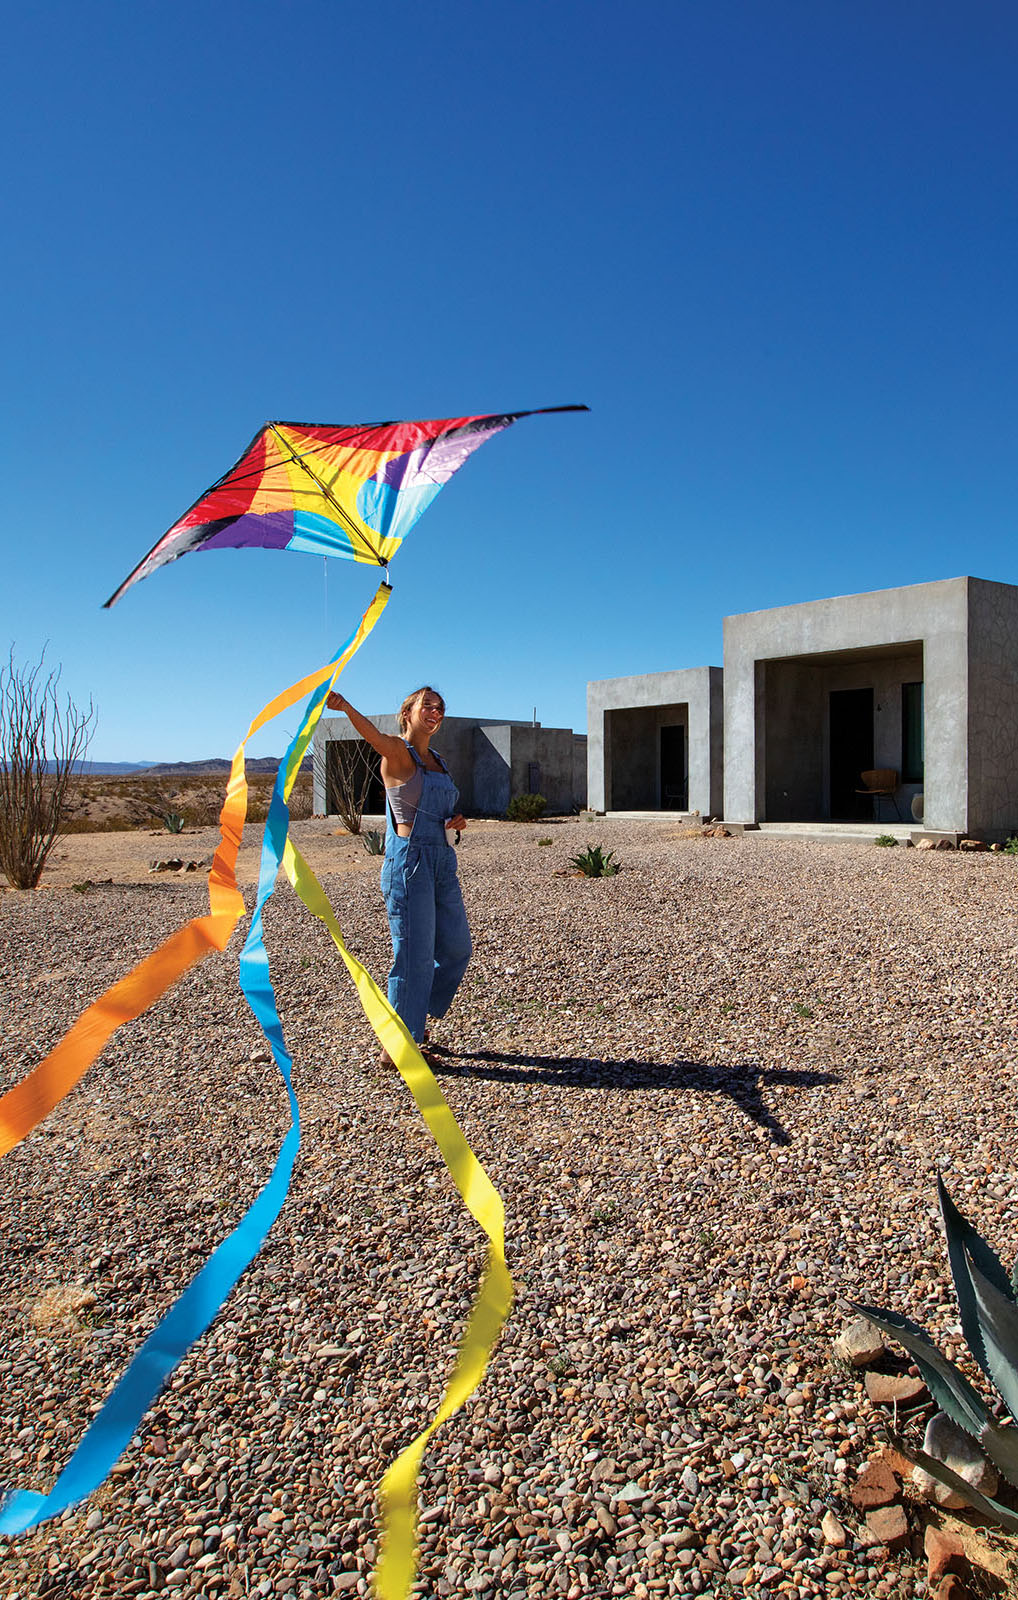 A woman in overalls flies a kite with orange, blue and yellow tails in front of the Willow House